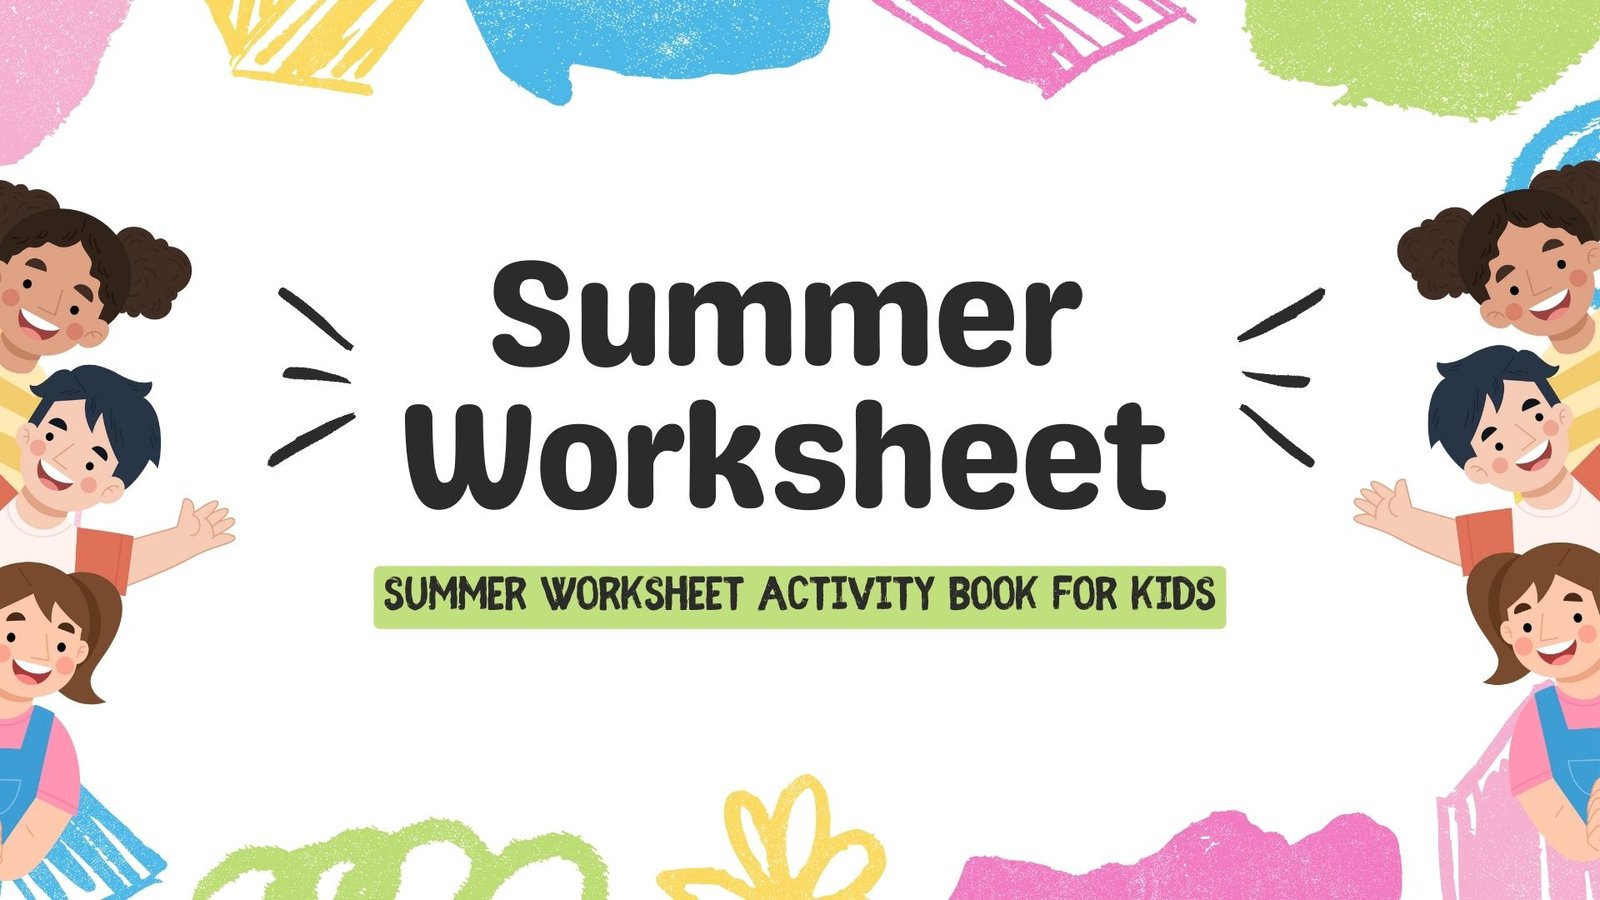 Fun Summer Worksheet Activity Book for Kids (20 Pages)